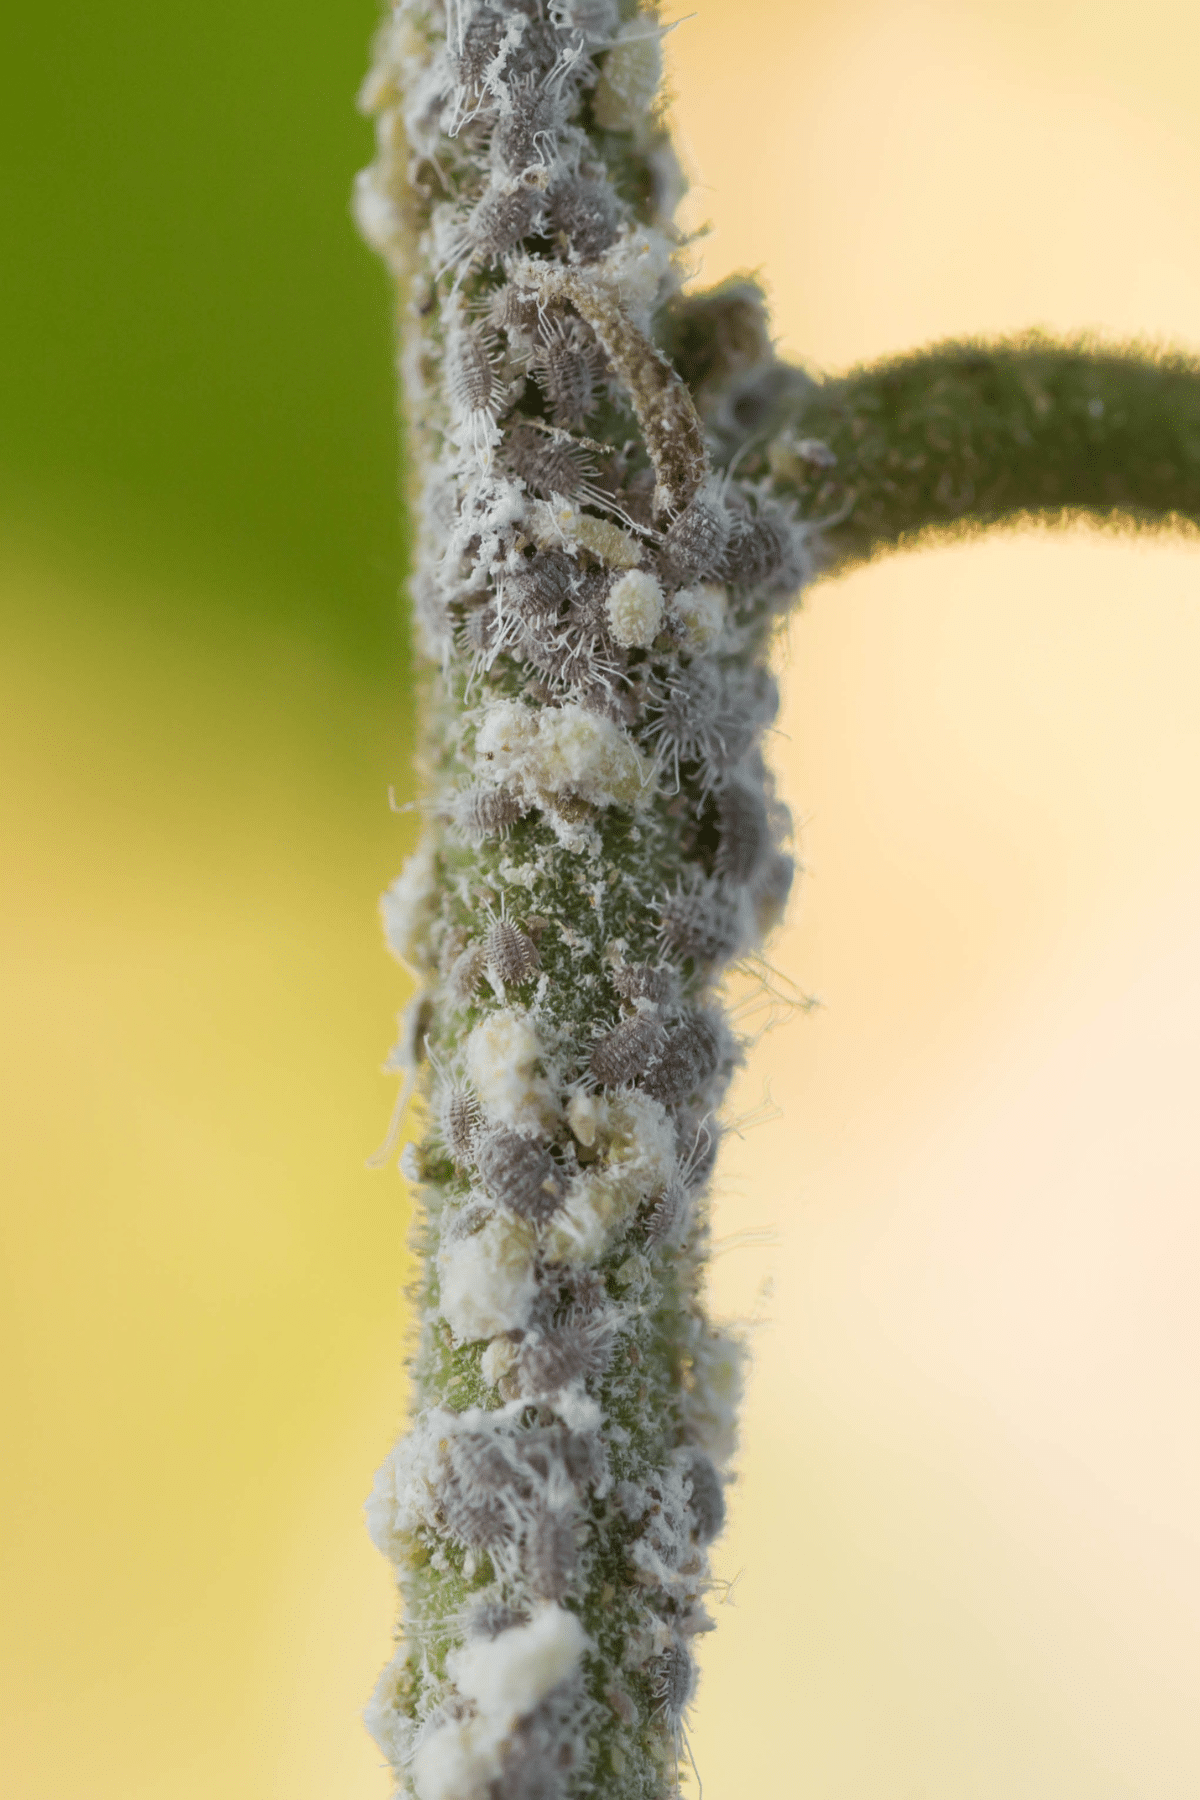 Mealybugs are holding on the branches.